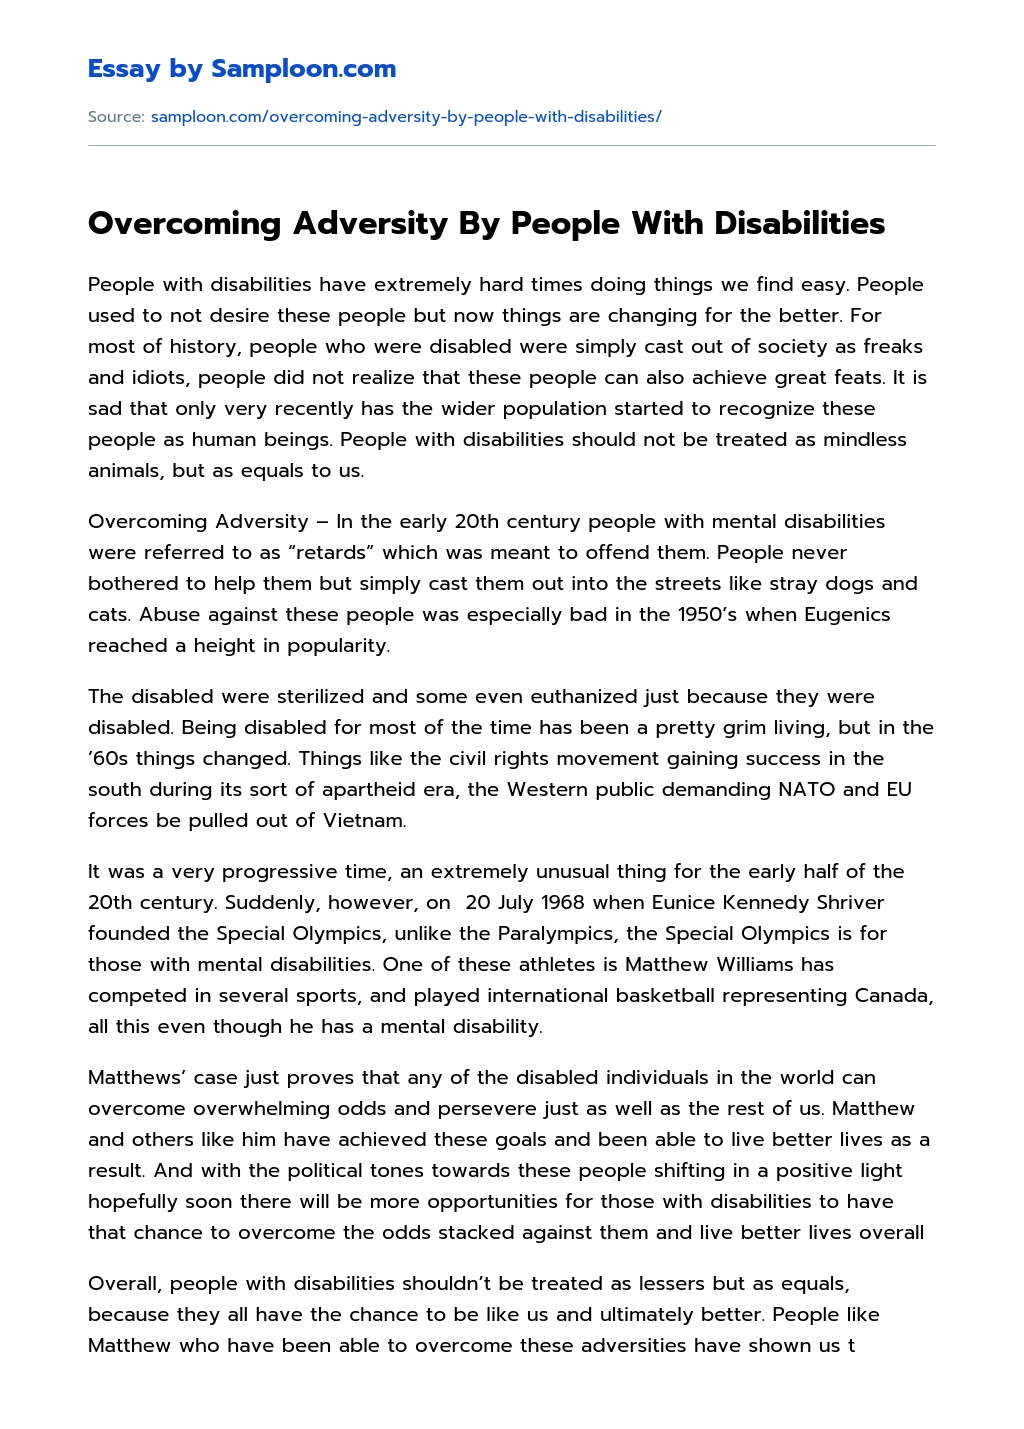 Overcoming Adversity By People With Disabilities essay